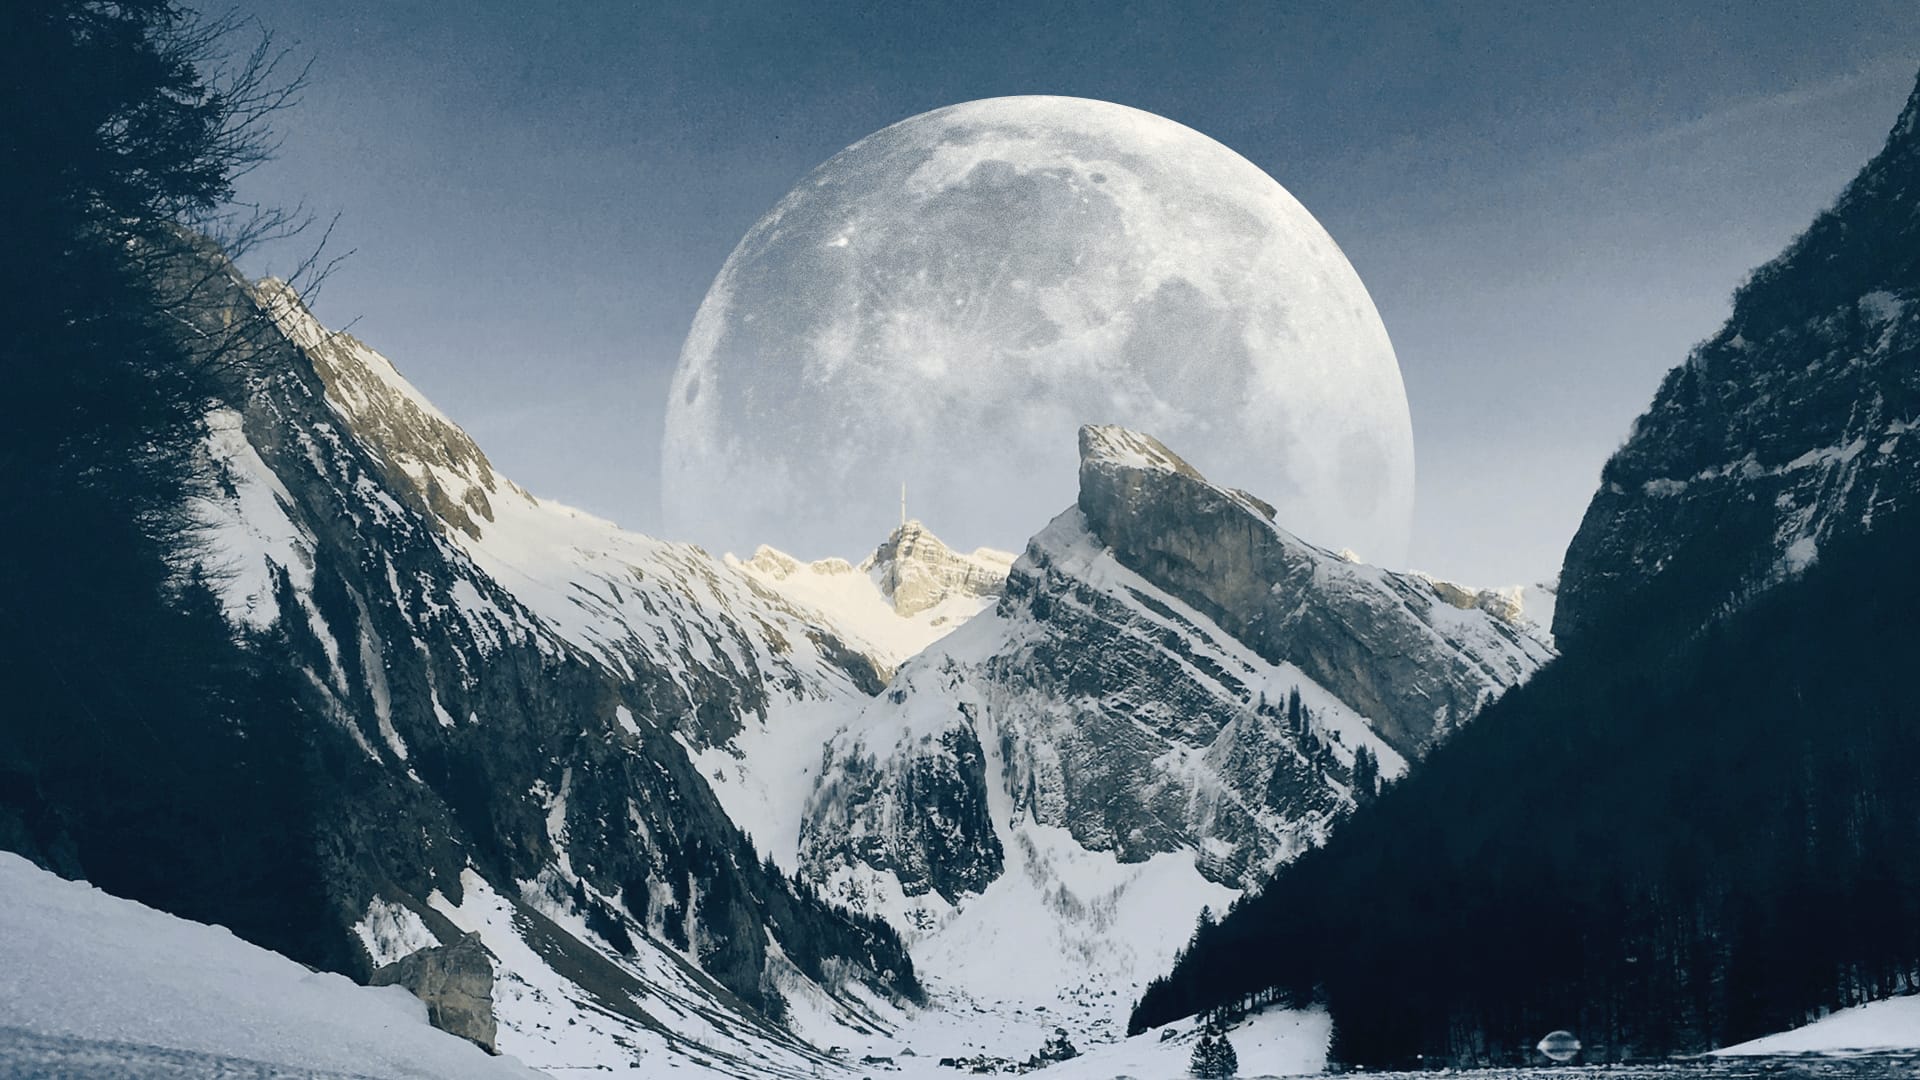 Giant Full Moon over mountains